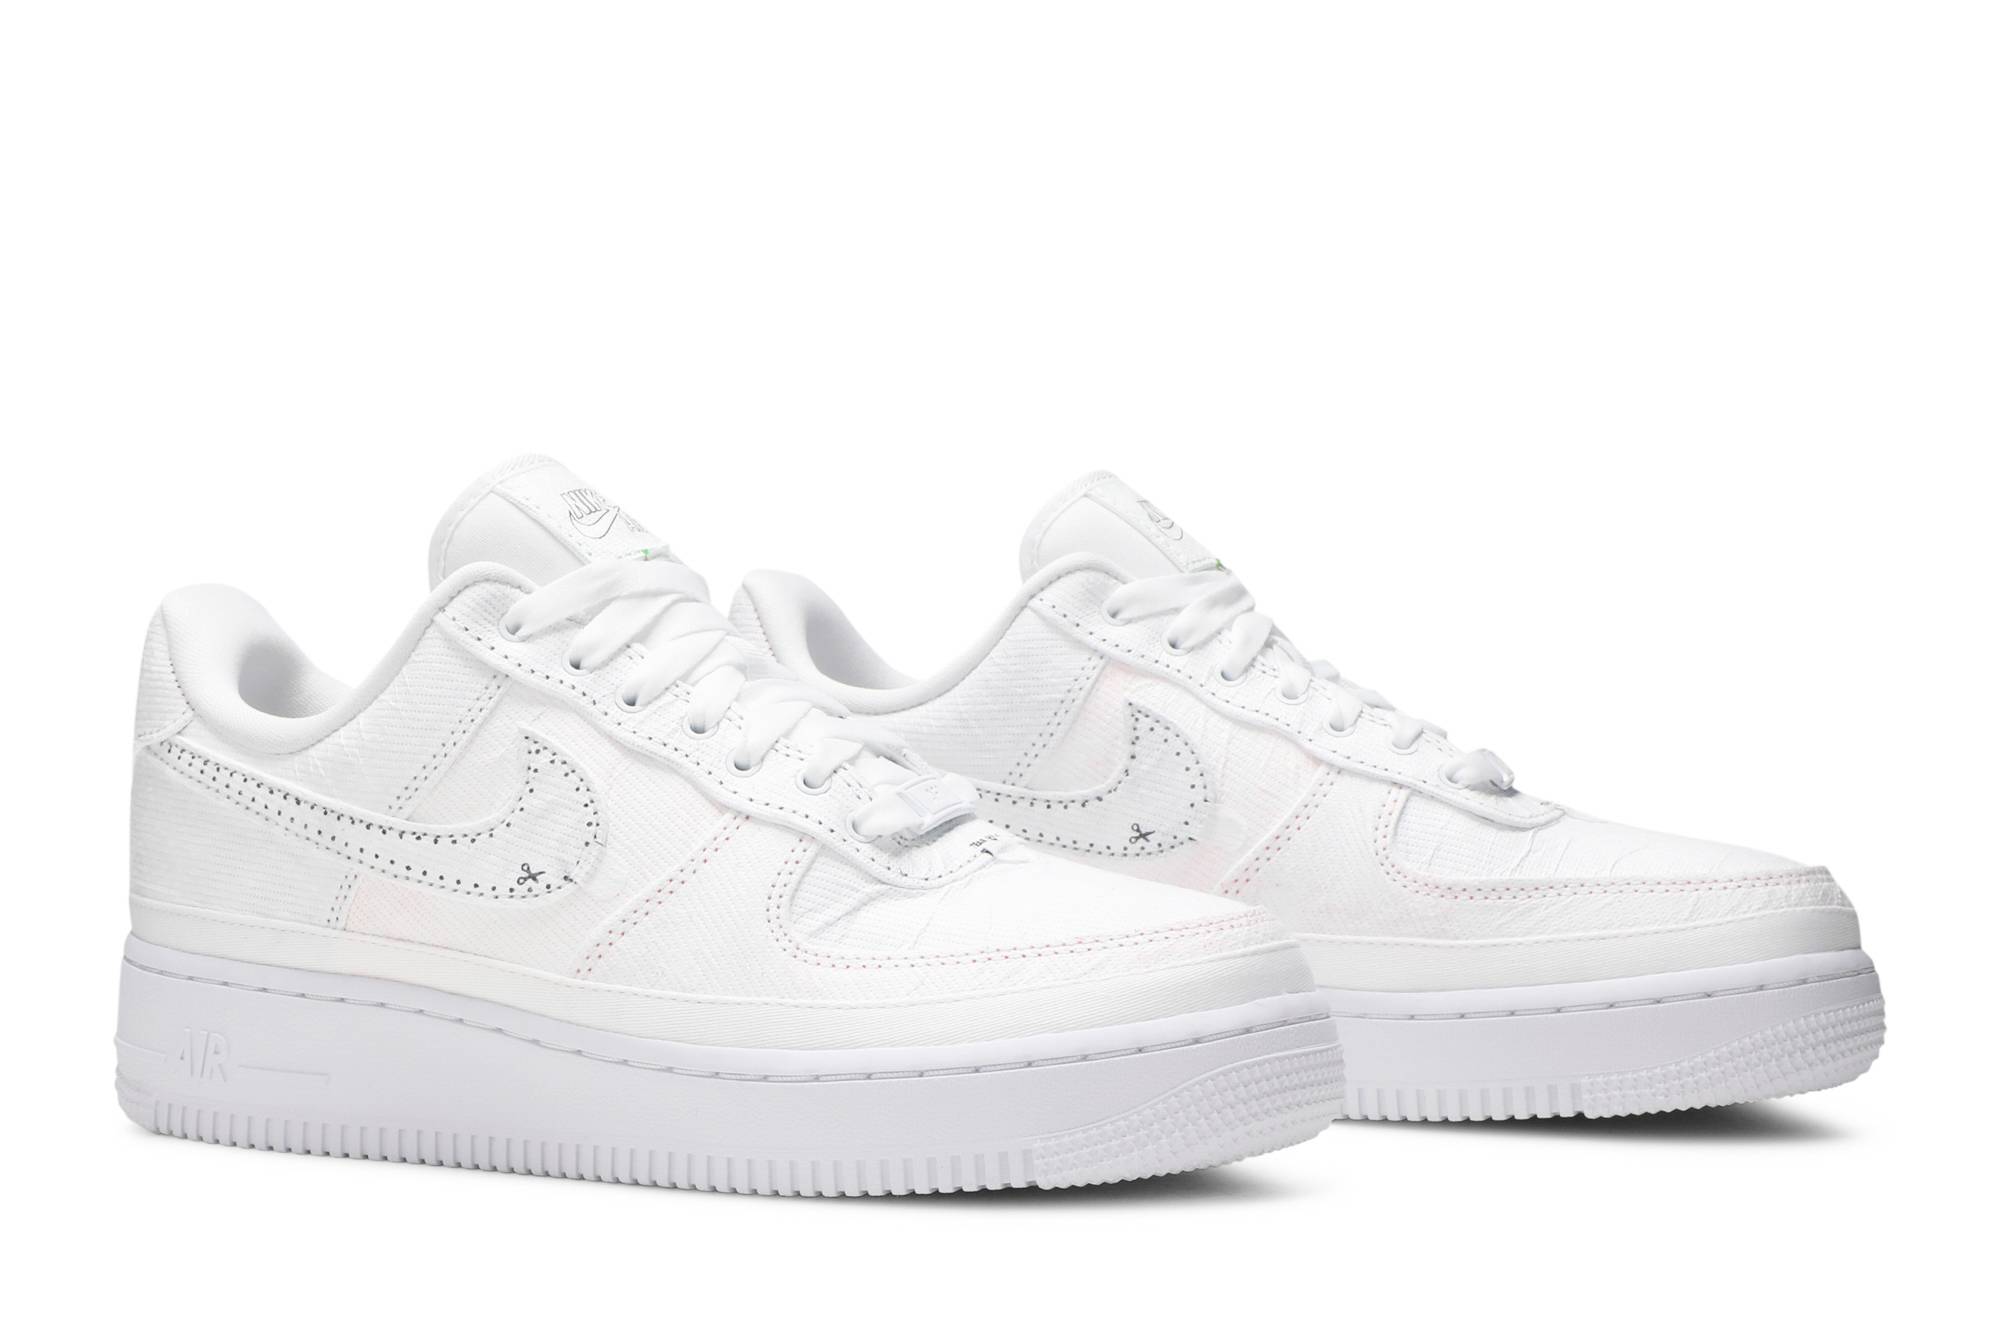 Nike Air Force 1 Low LX 'Reveal' WMNS 